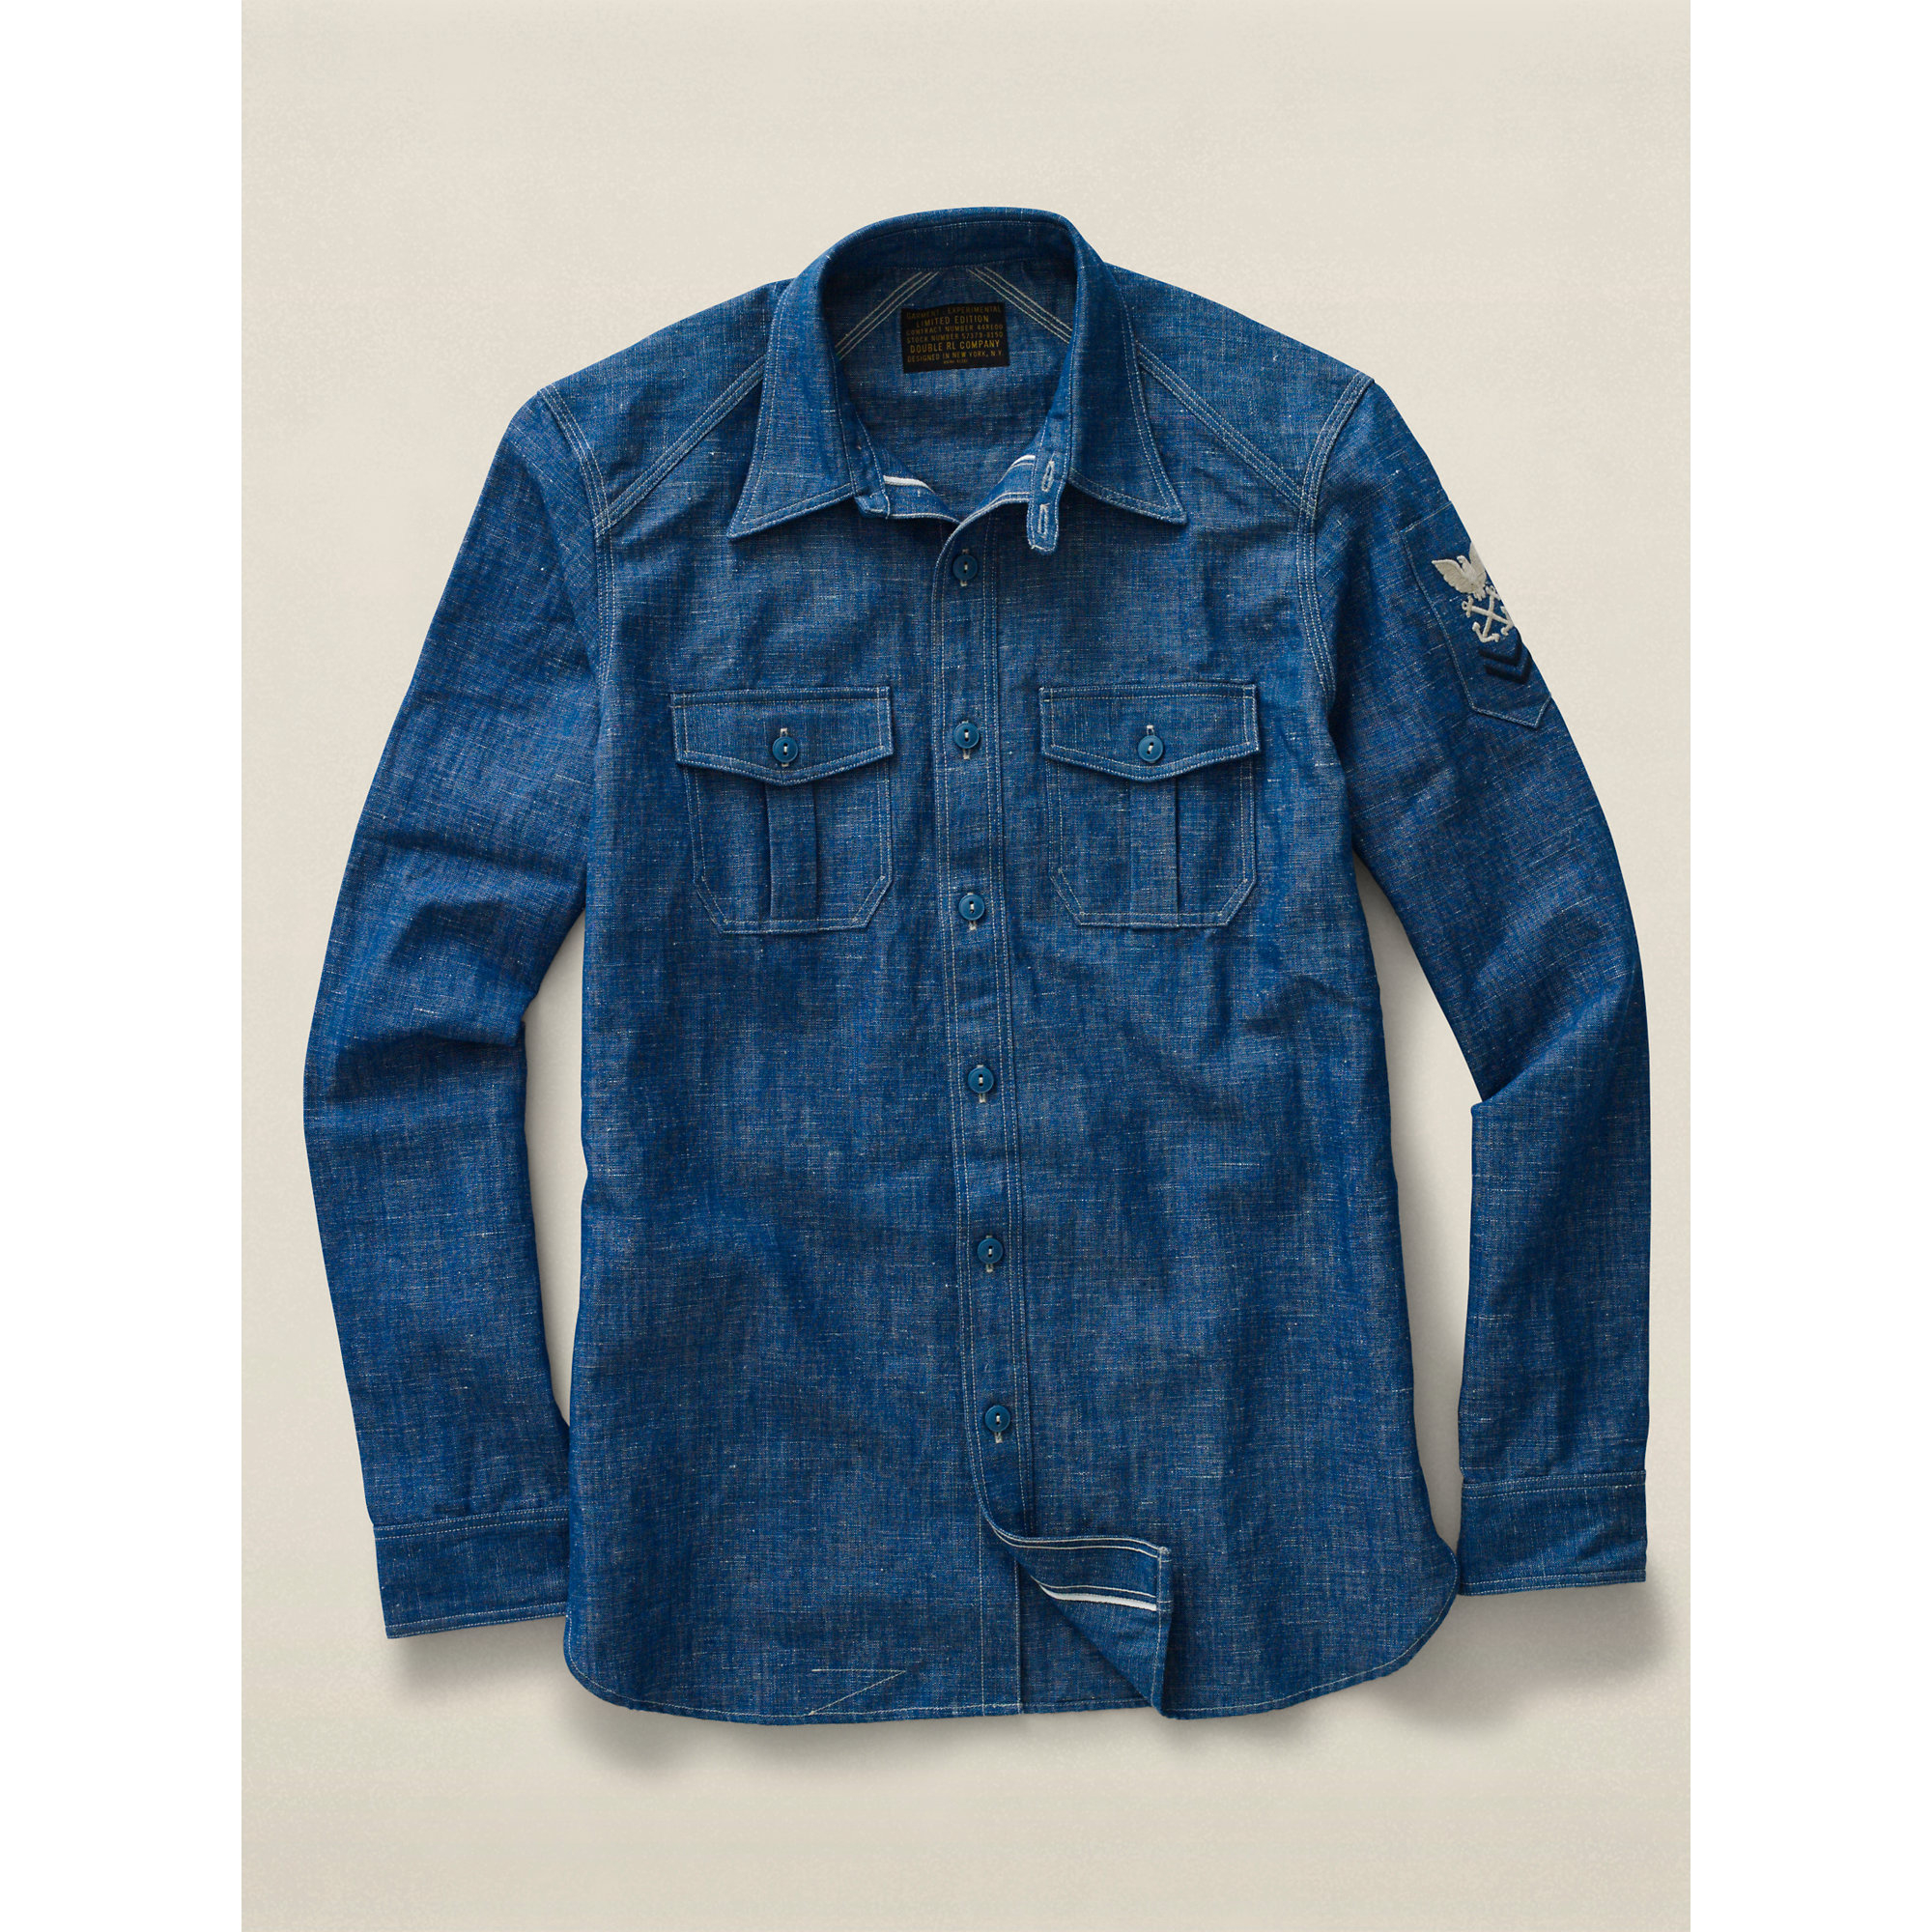 Lyst - RRL Limited-Edition Worthy Shirt in Blue for Men